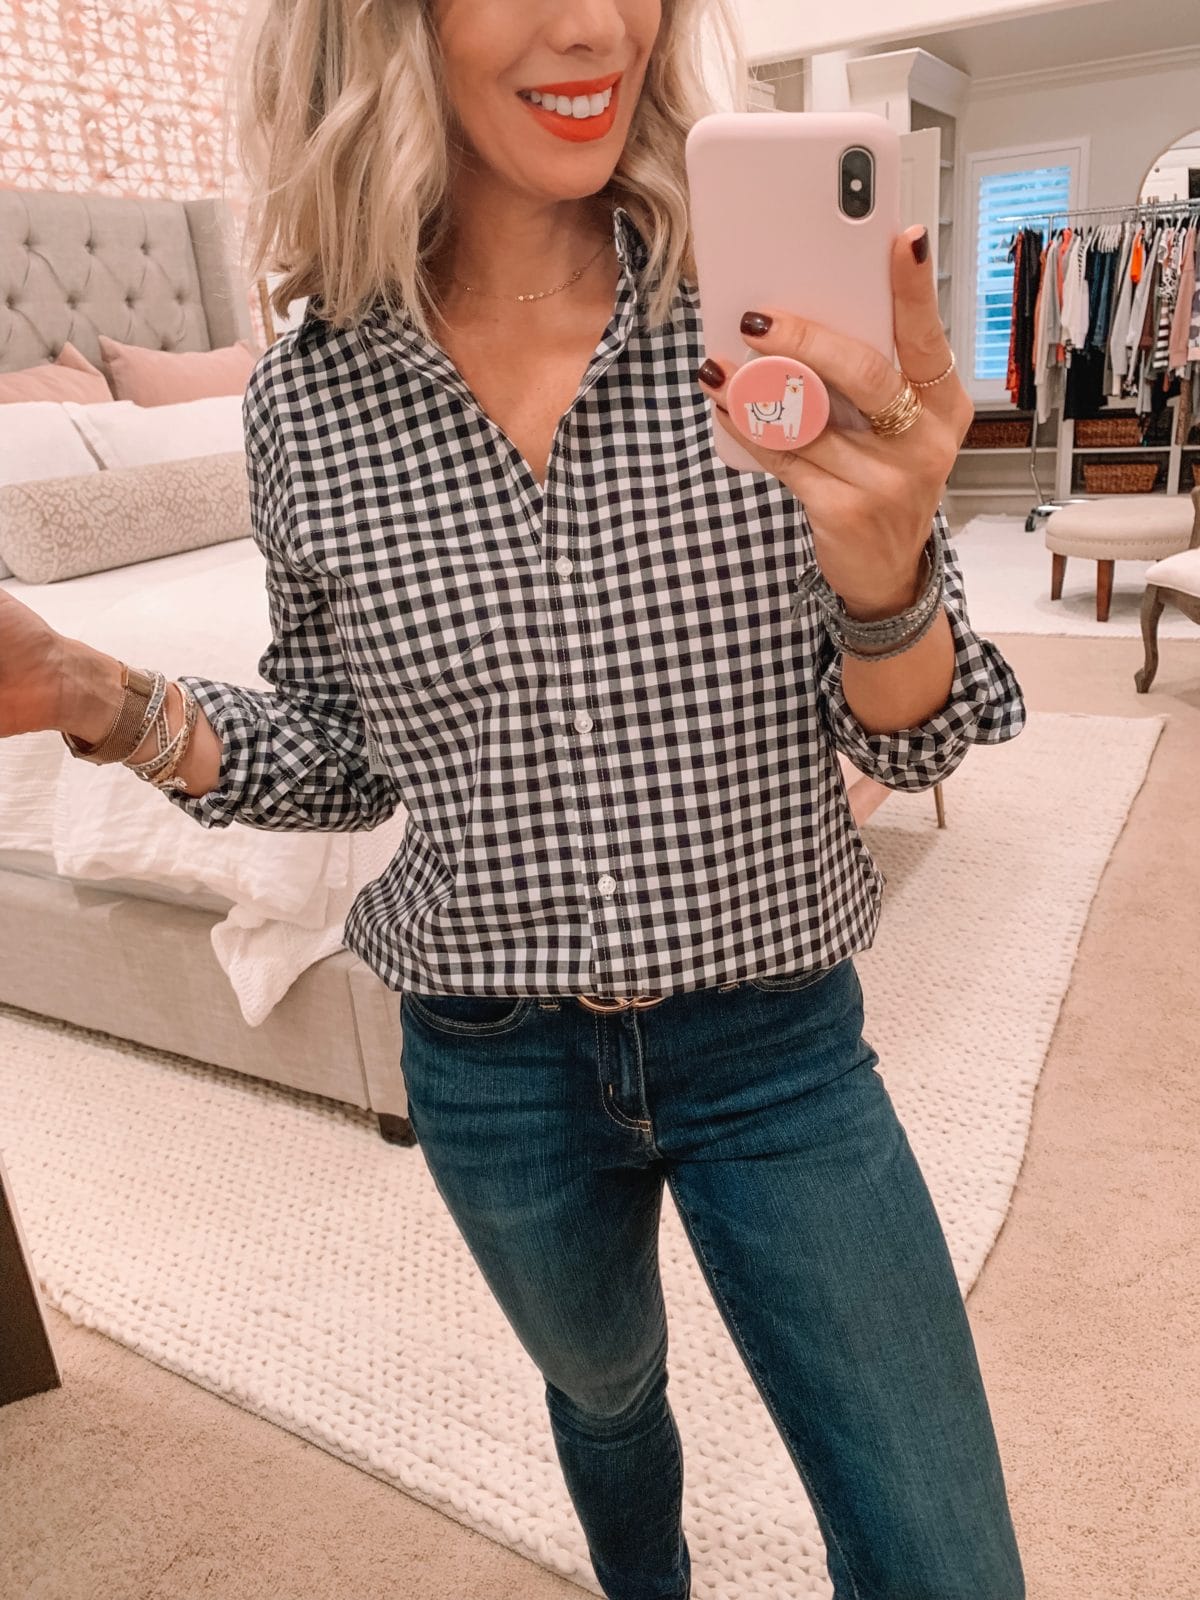 Amazon fashion haul, gingham top and jeans 